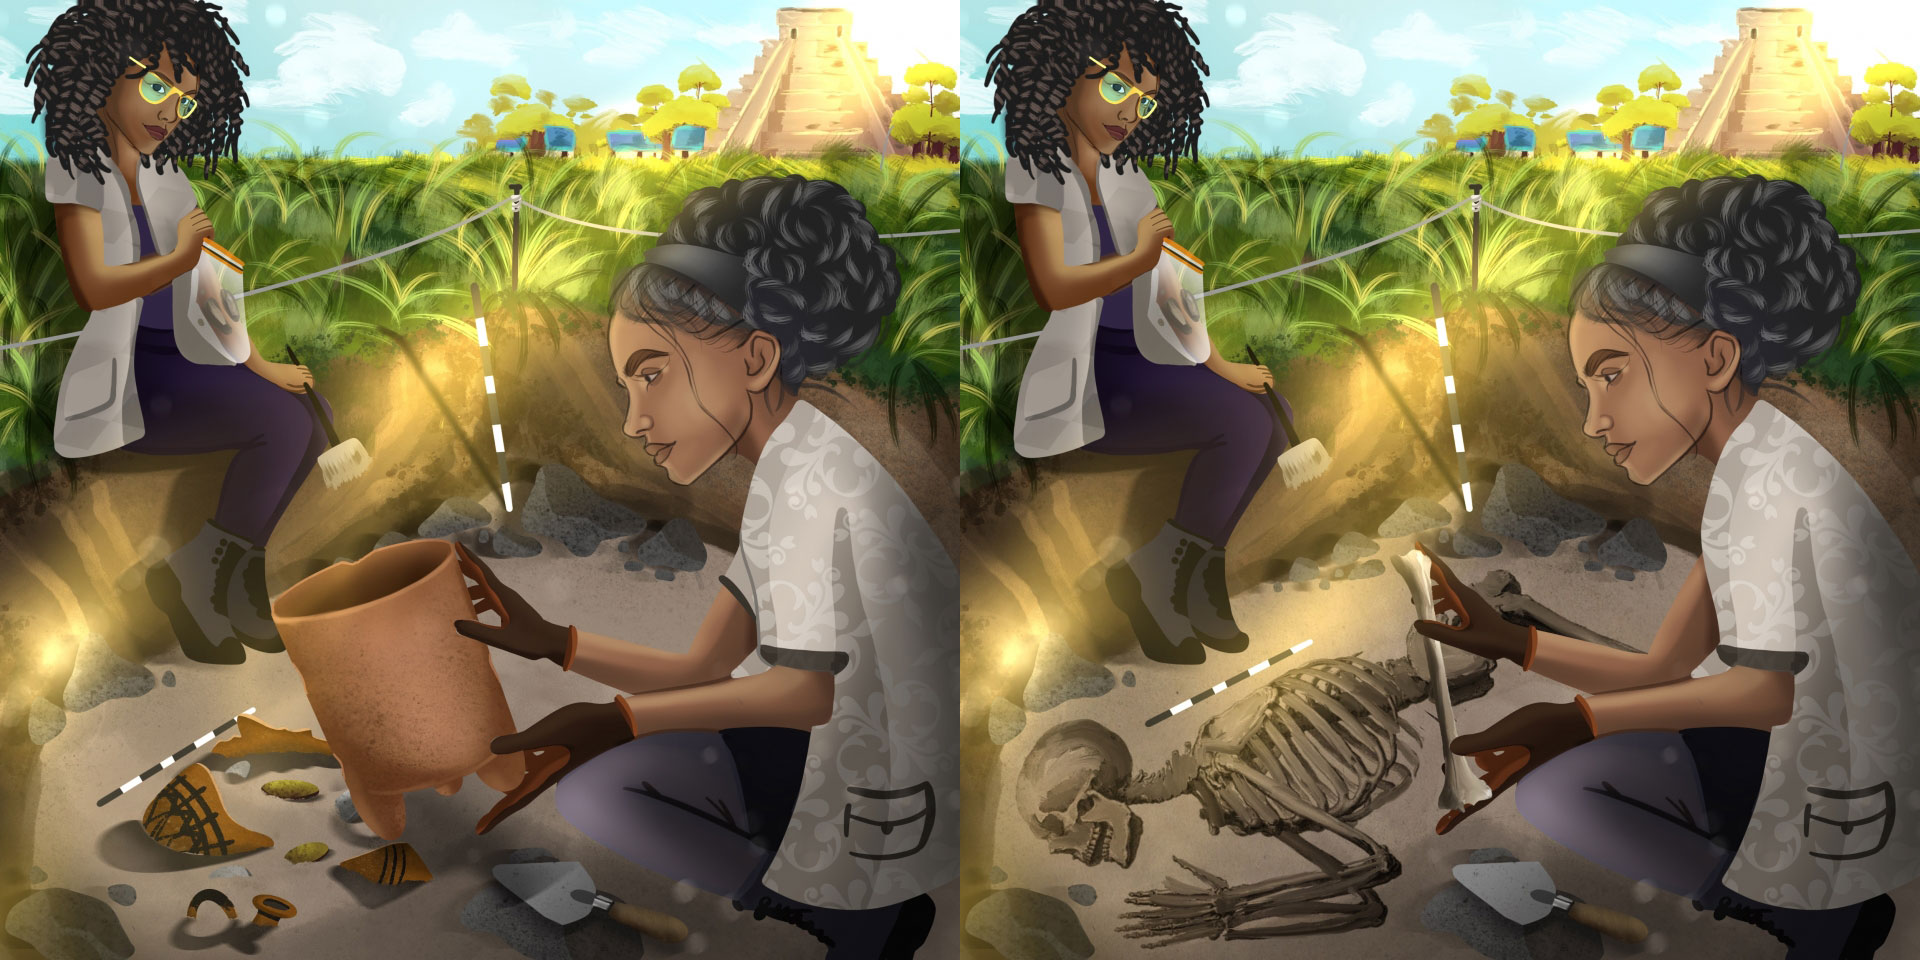 illustrations of two different anthropology scenarios